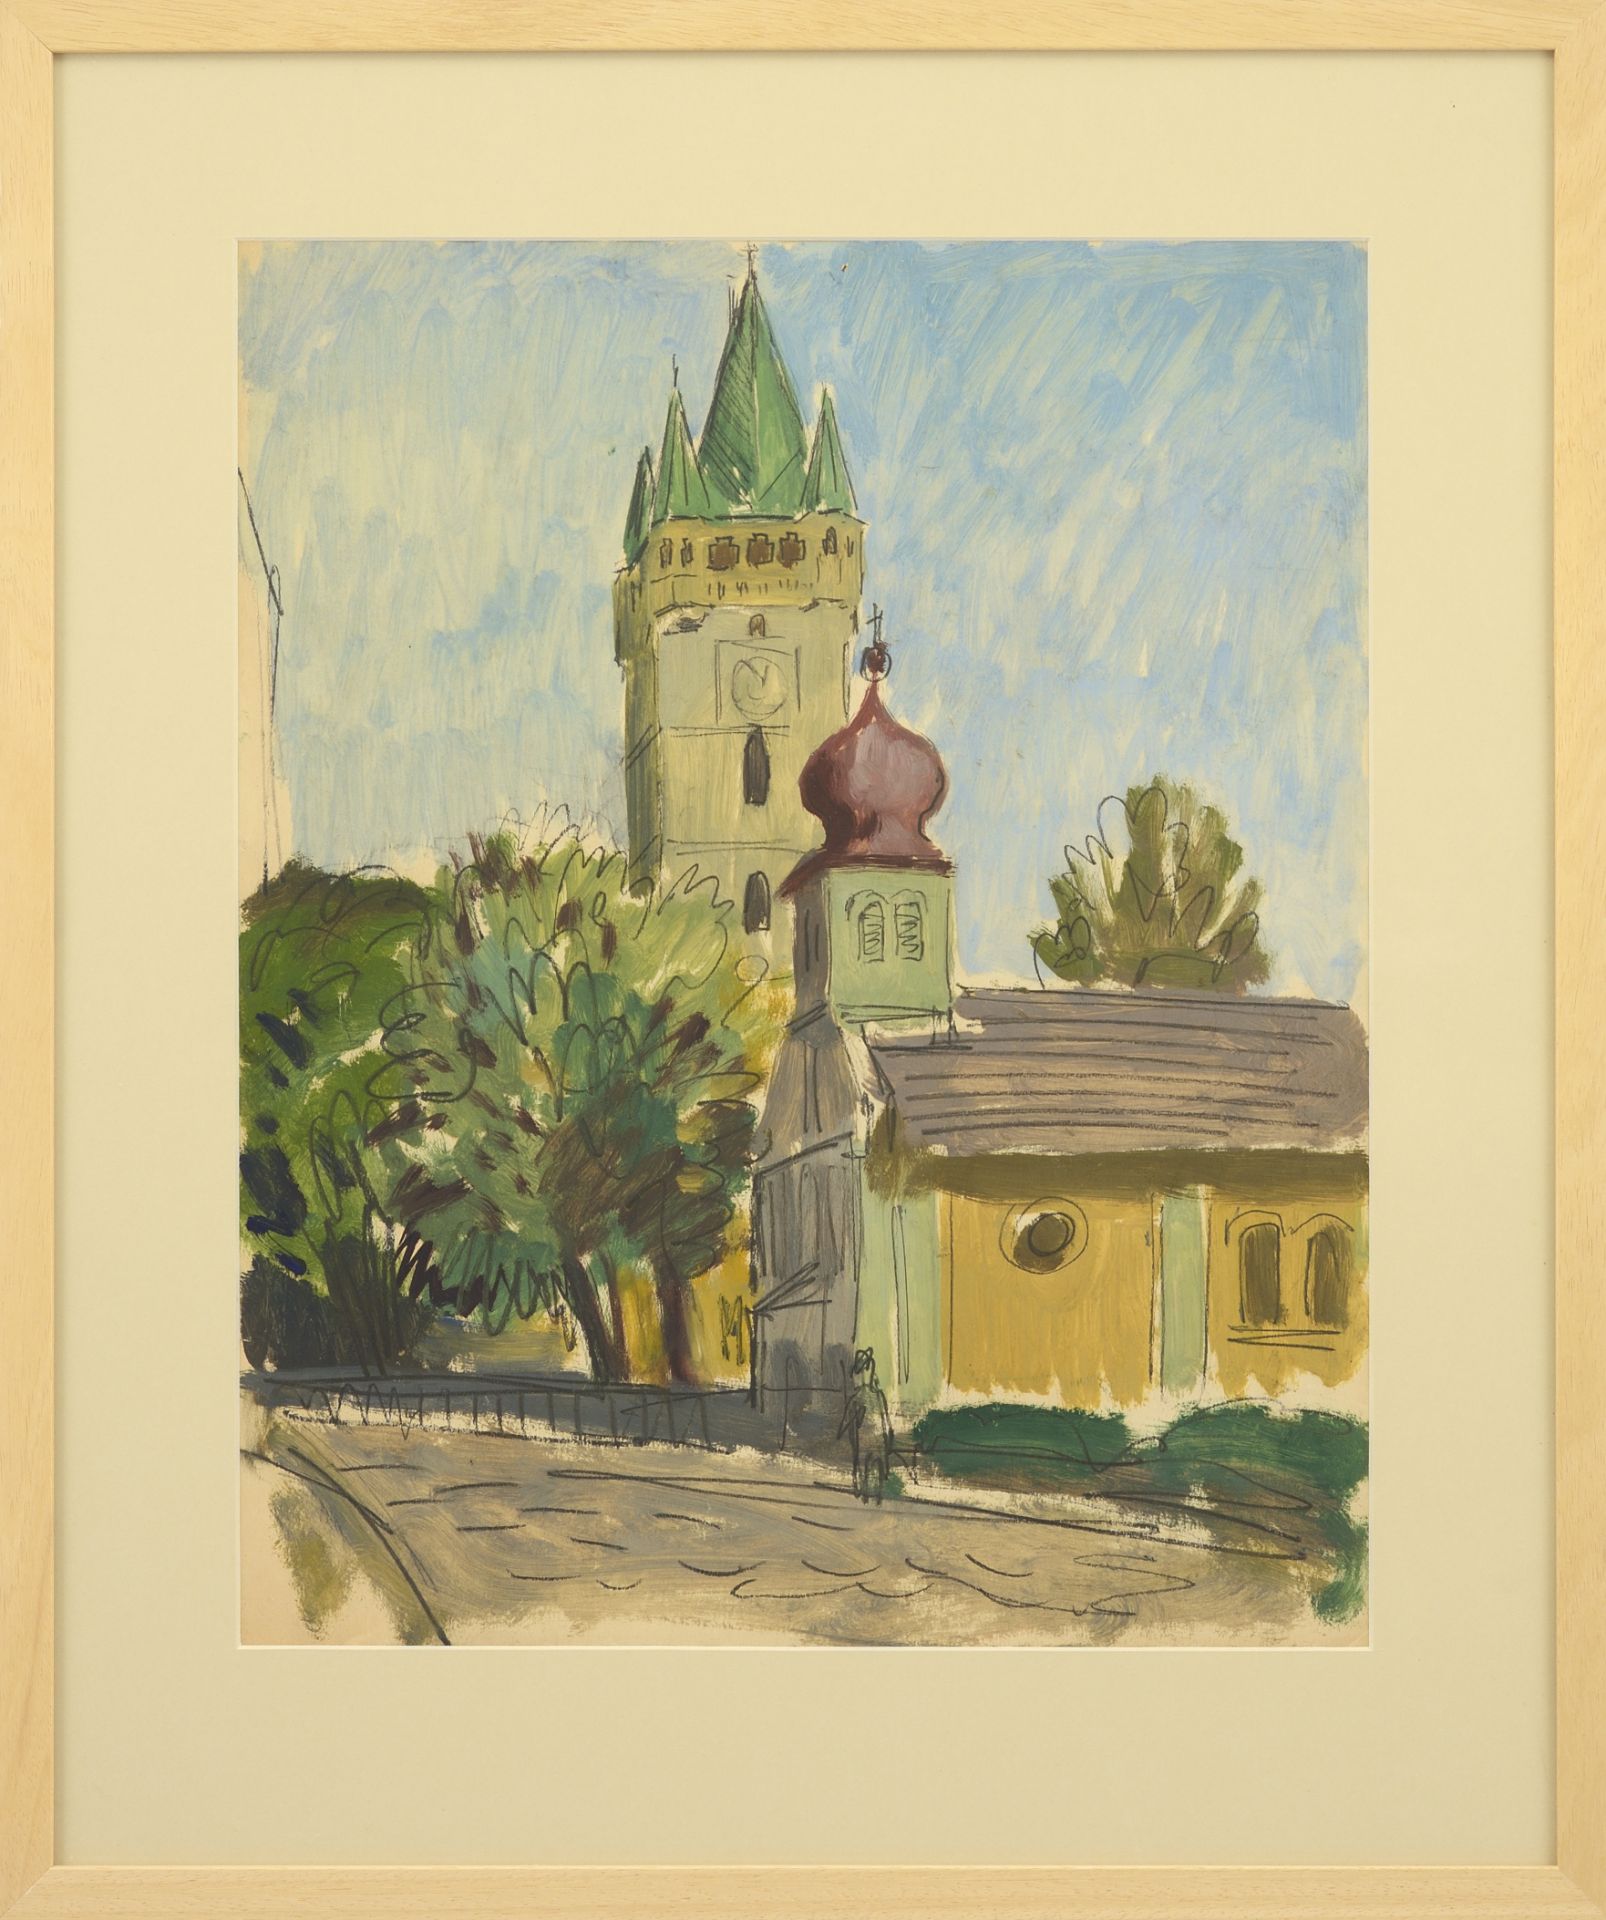 Vladimir Petrov Kavaldzhiev /1908-1988/ „View of the tower St. Stefan in Baia Mare” - Image 2 of 3